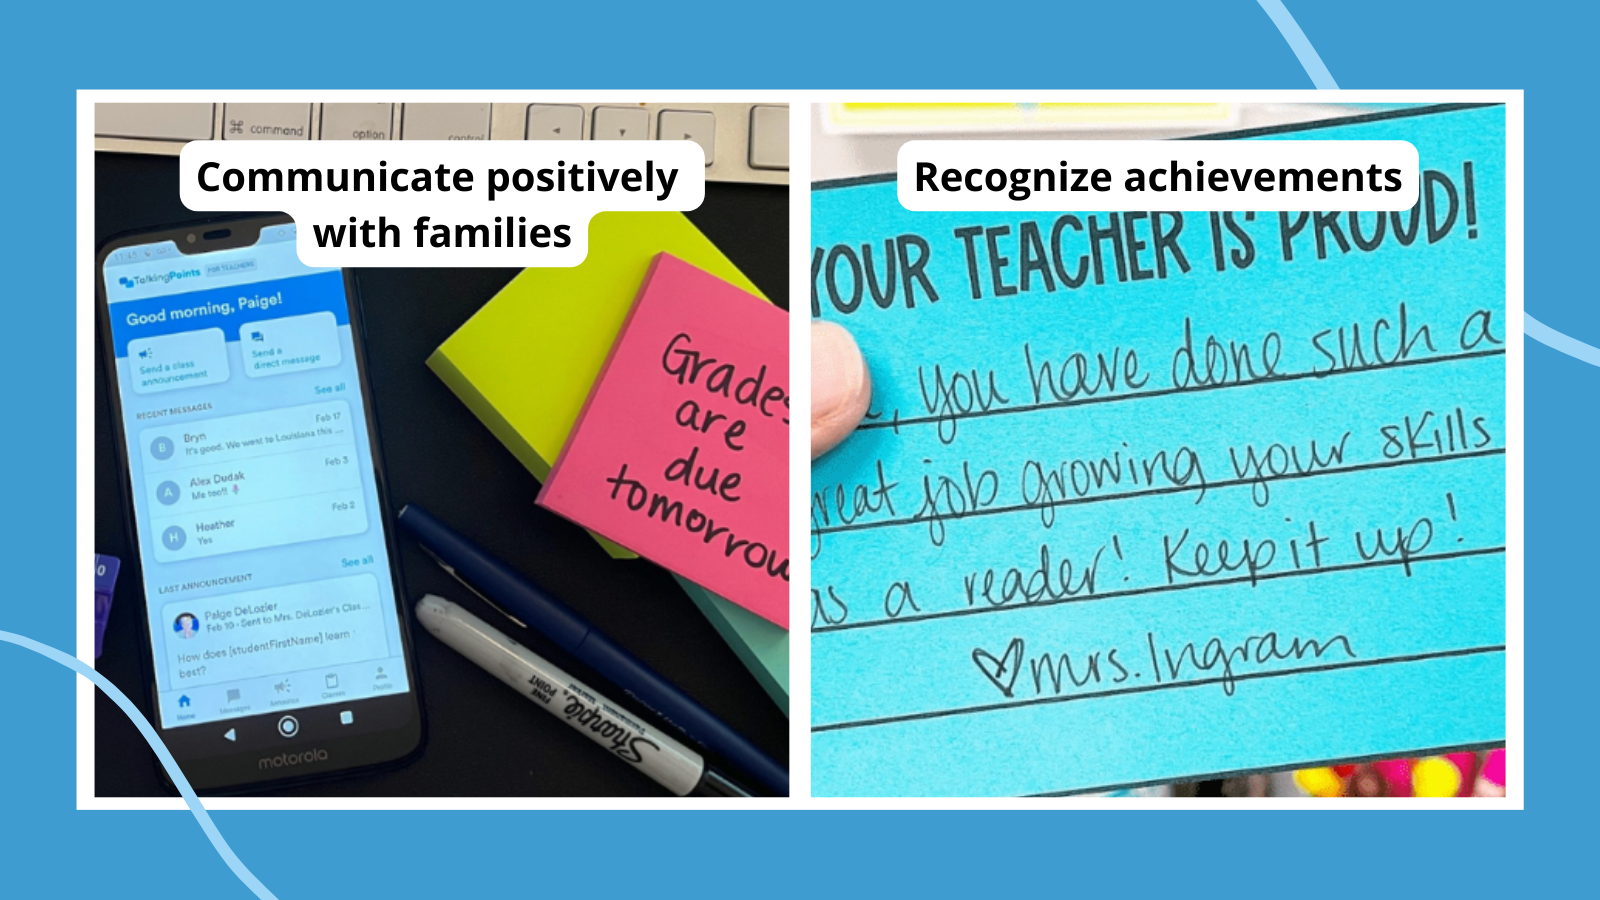 Examples of classroom management strategies including a positive note from teacher to student and a parent communication app on a phone screen.